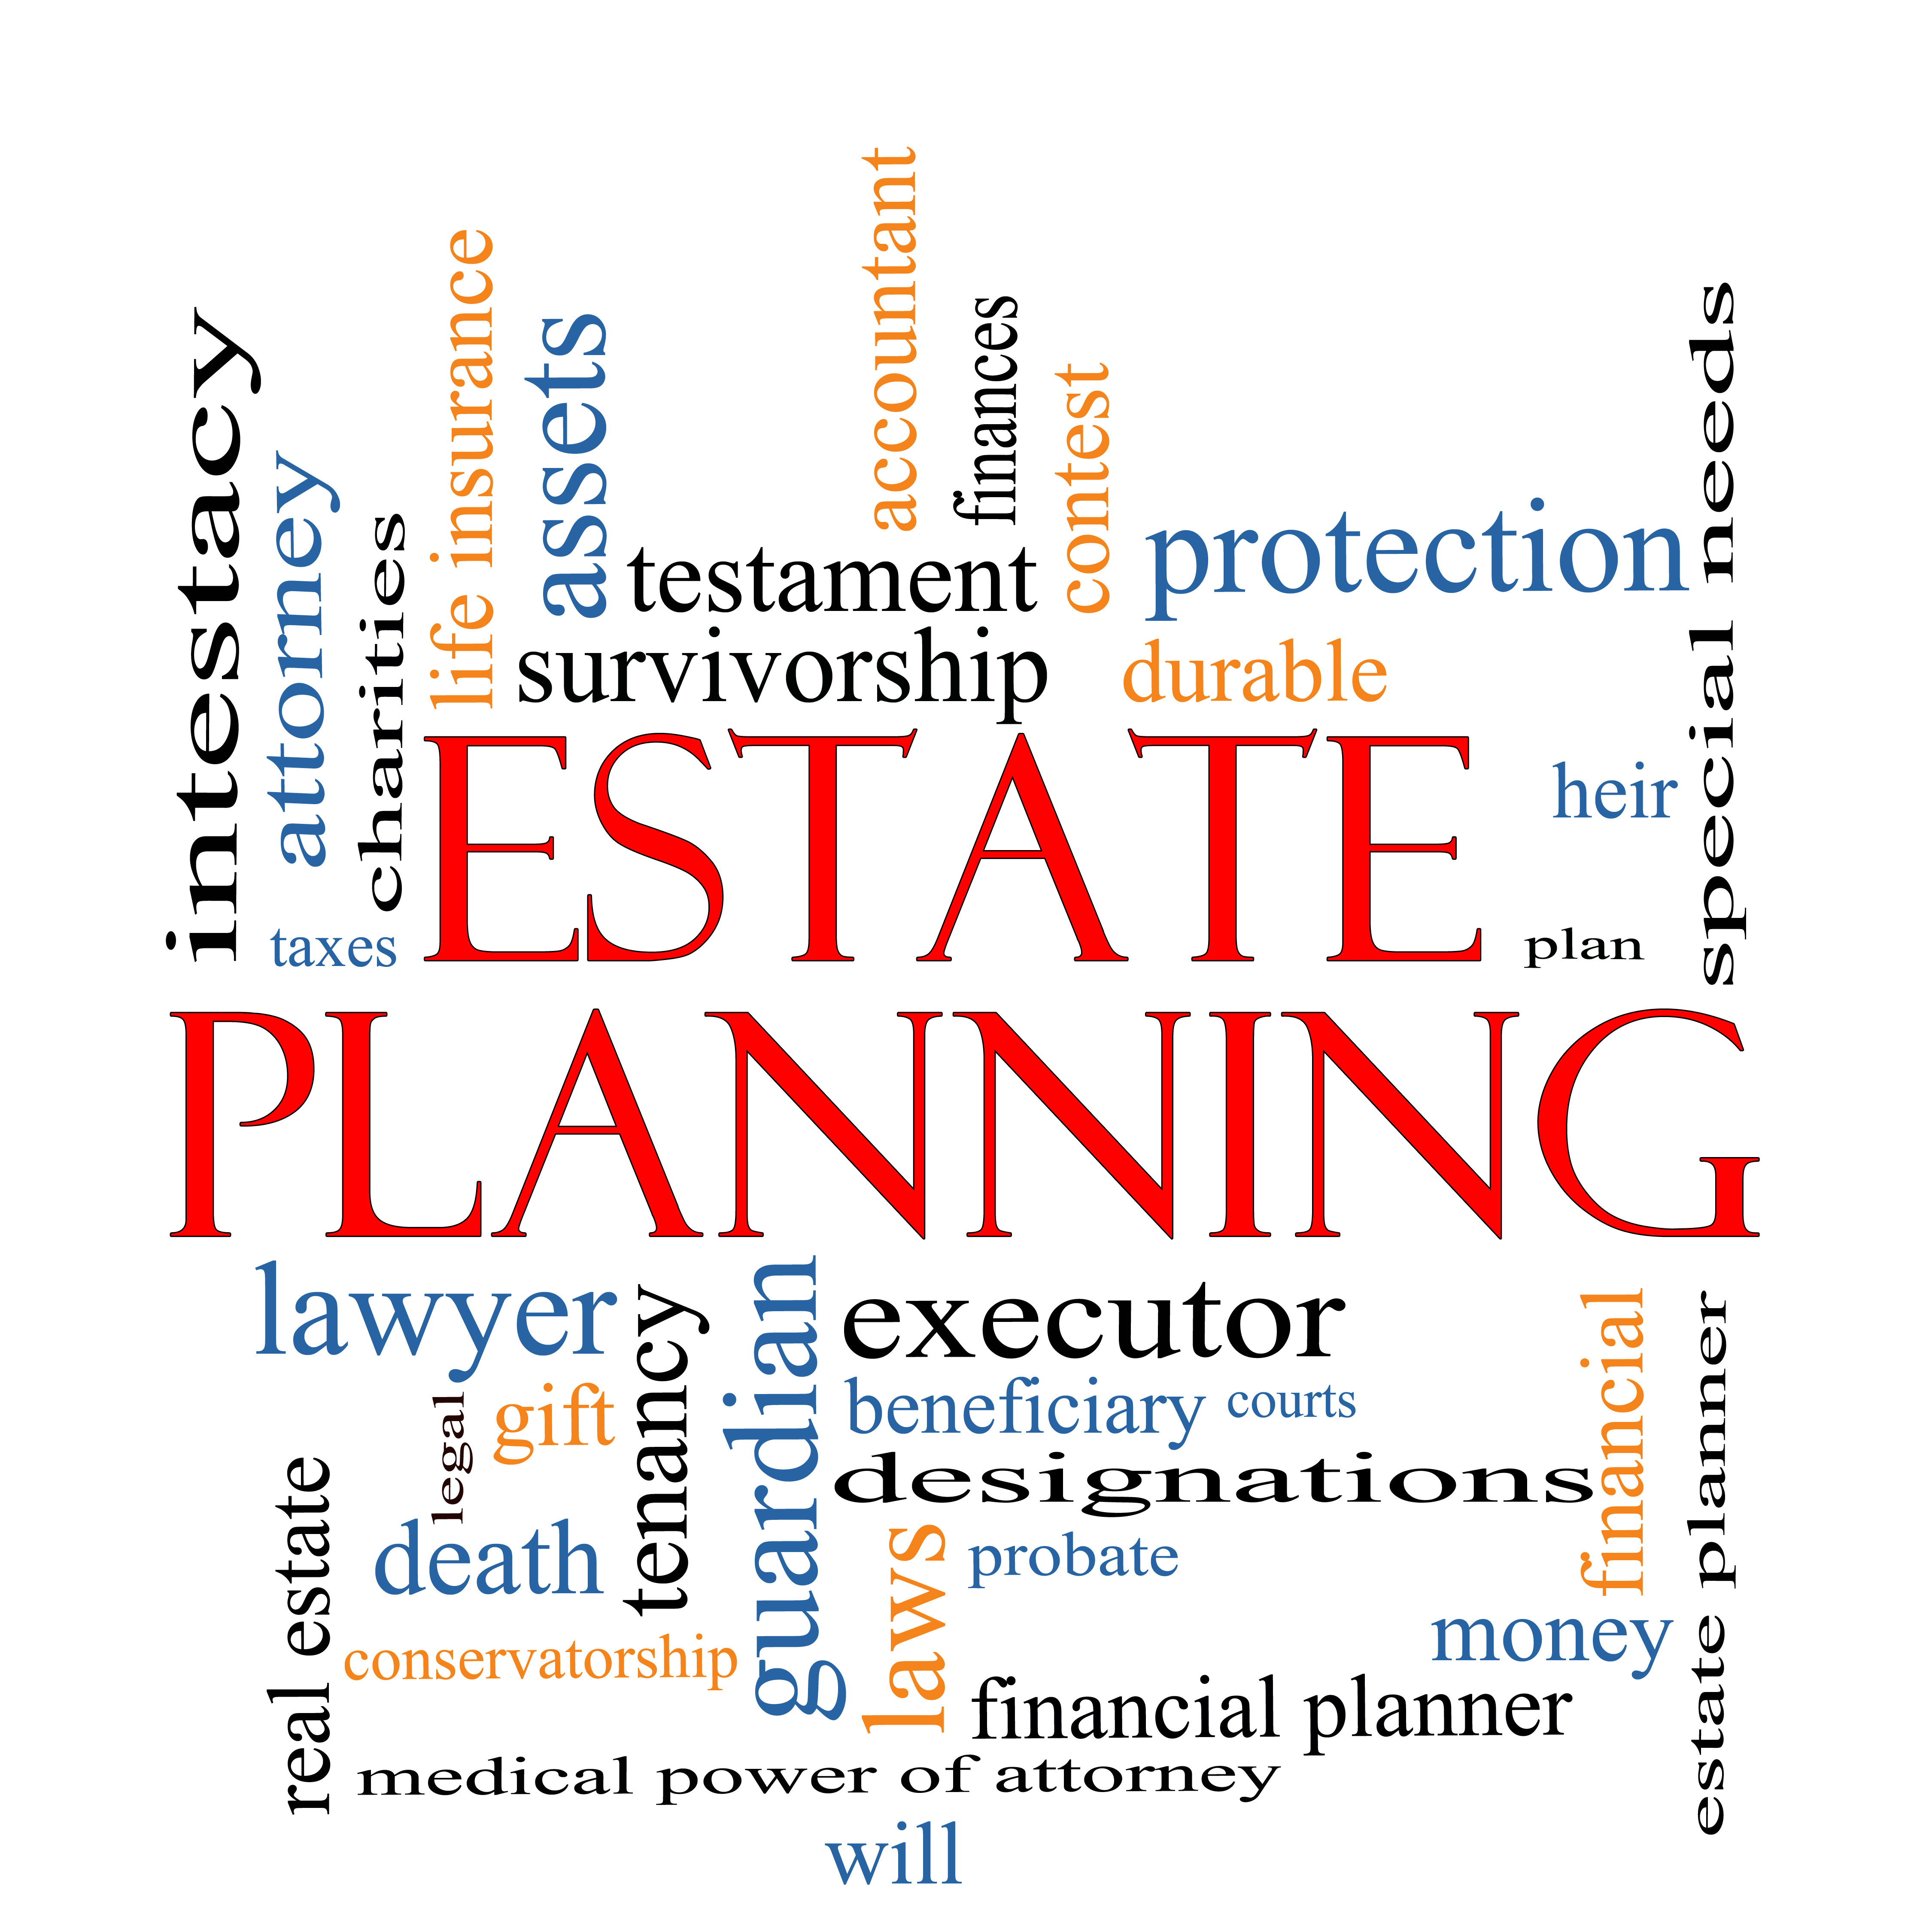 7 Things You Must Know About Estate Plan, Probate, and Estate Administration in Minnesota